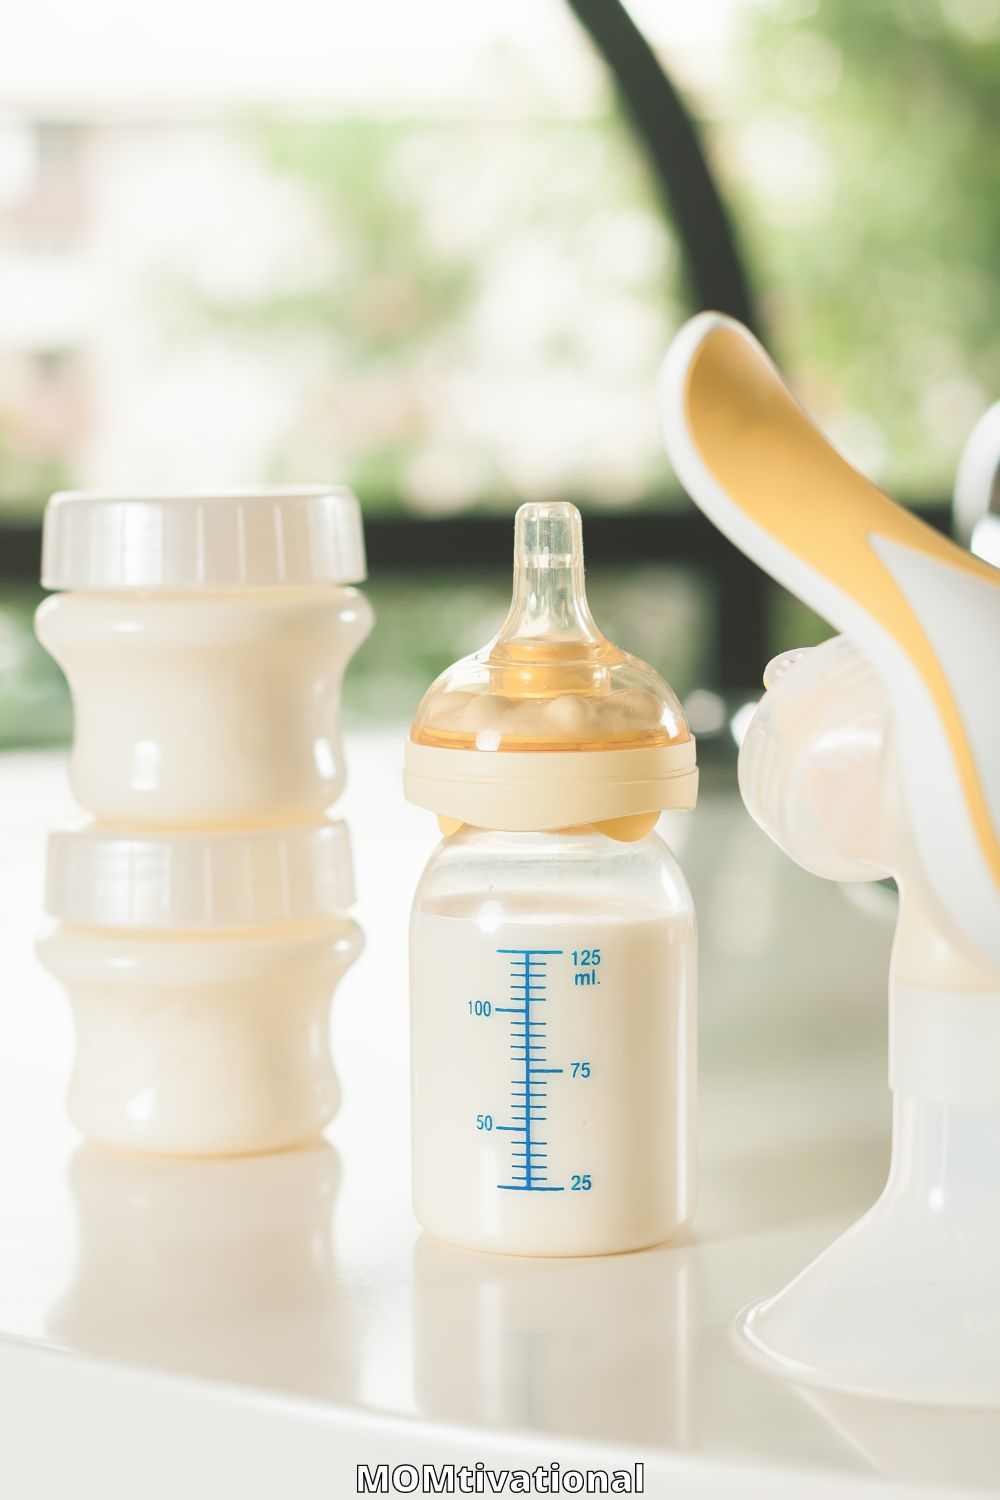 Breastpump with breastmilk - Featured in : Breastfeeding Tips For New Moms